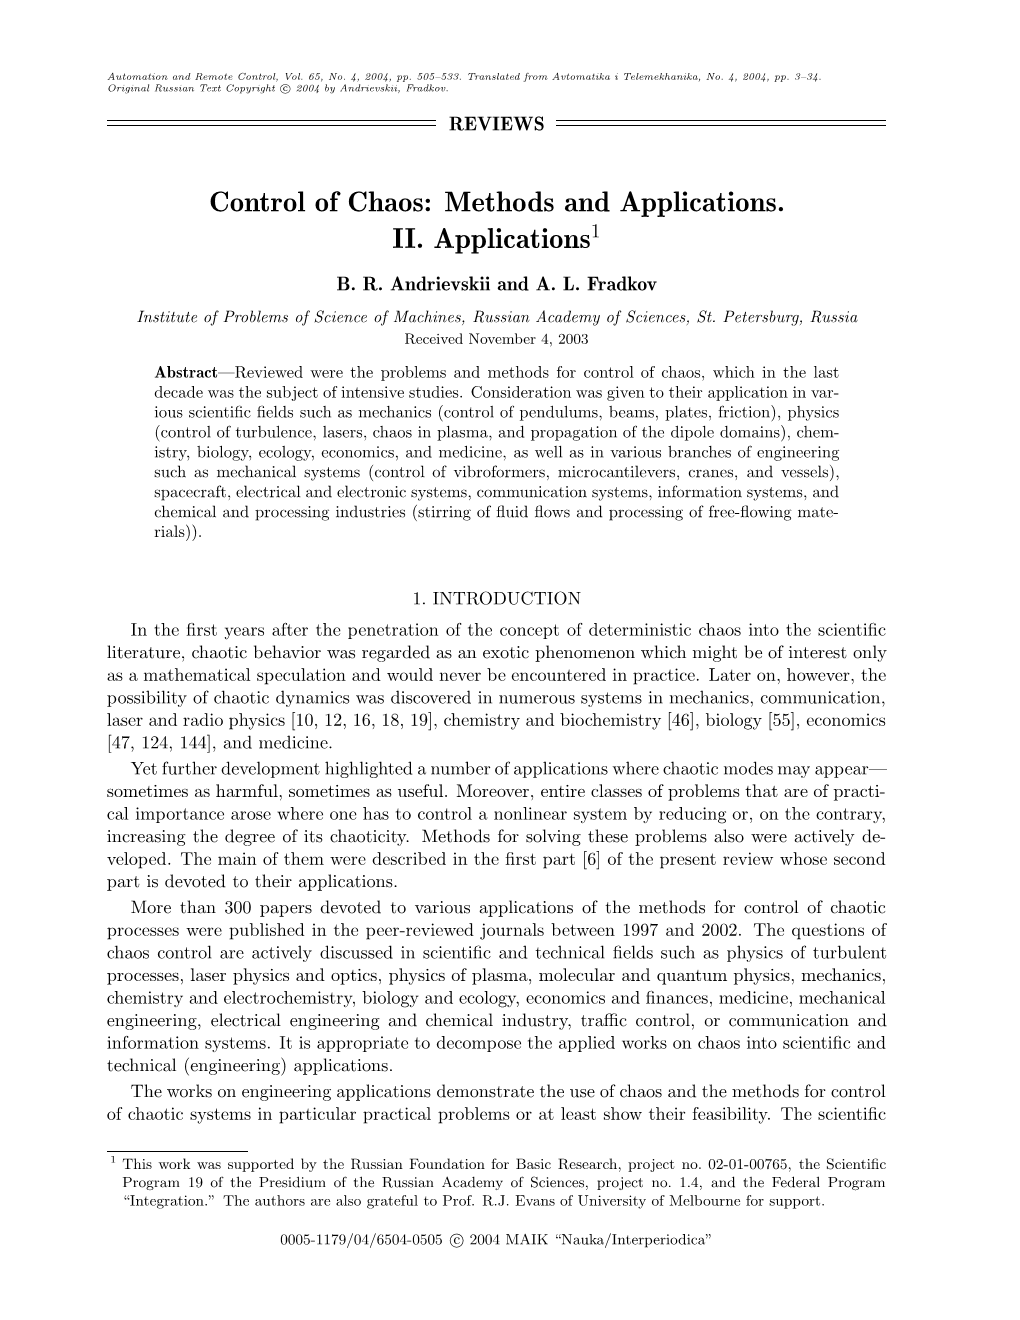 Control of Chaos: Methods and Applications. II. Applications1